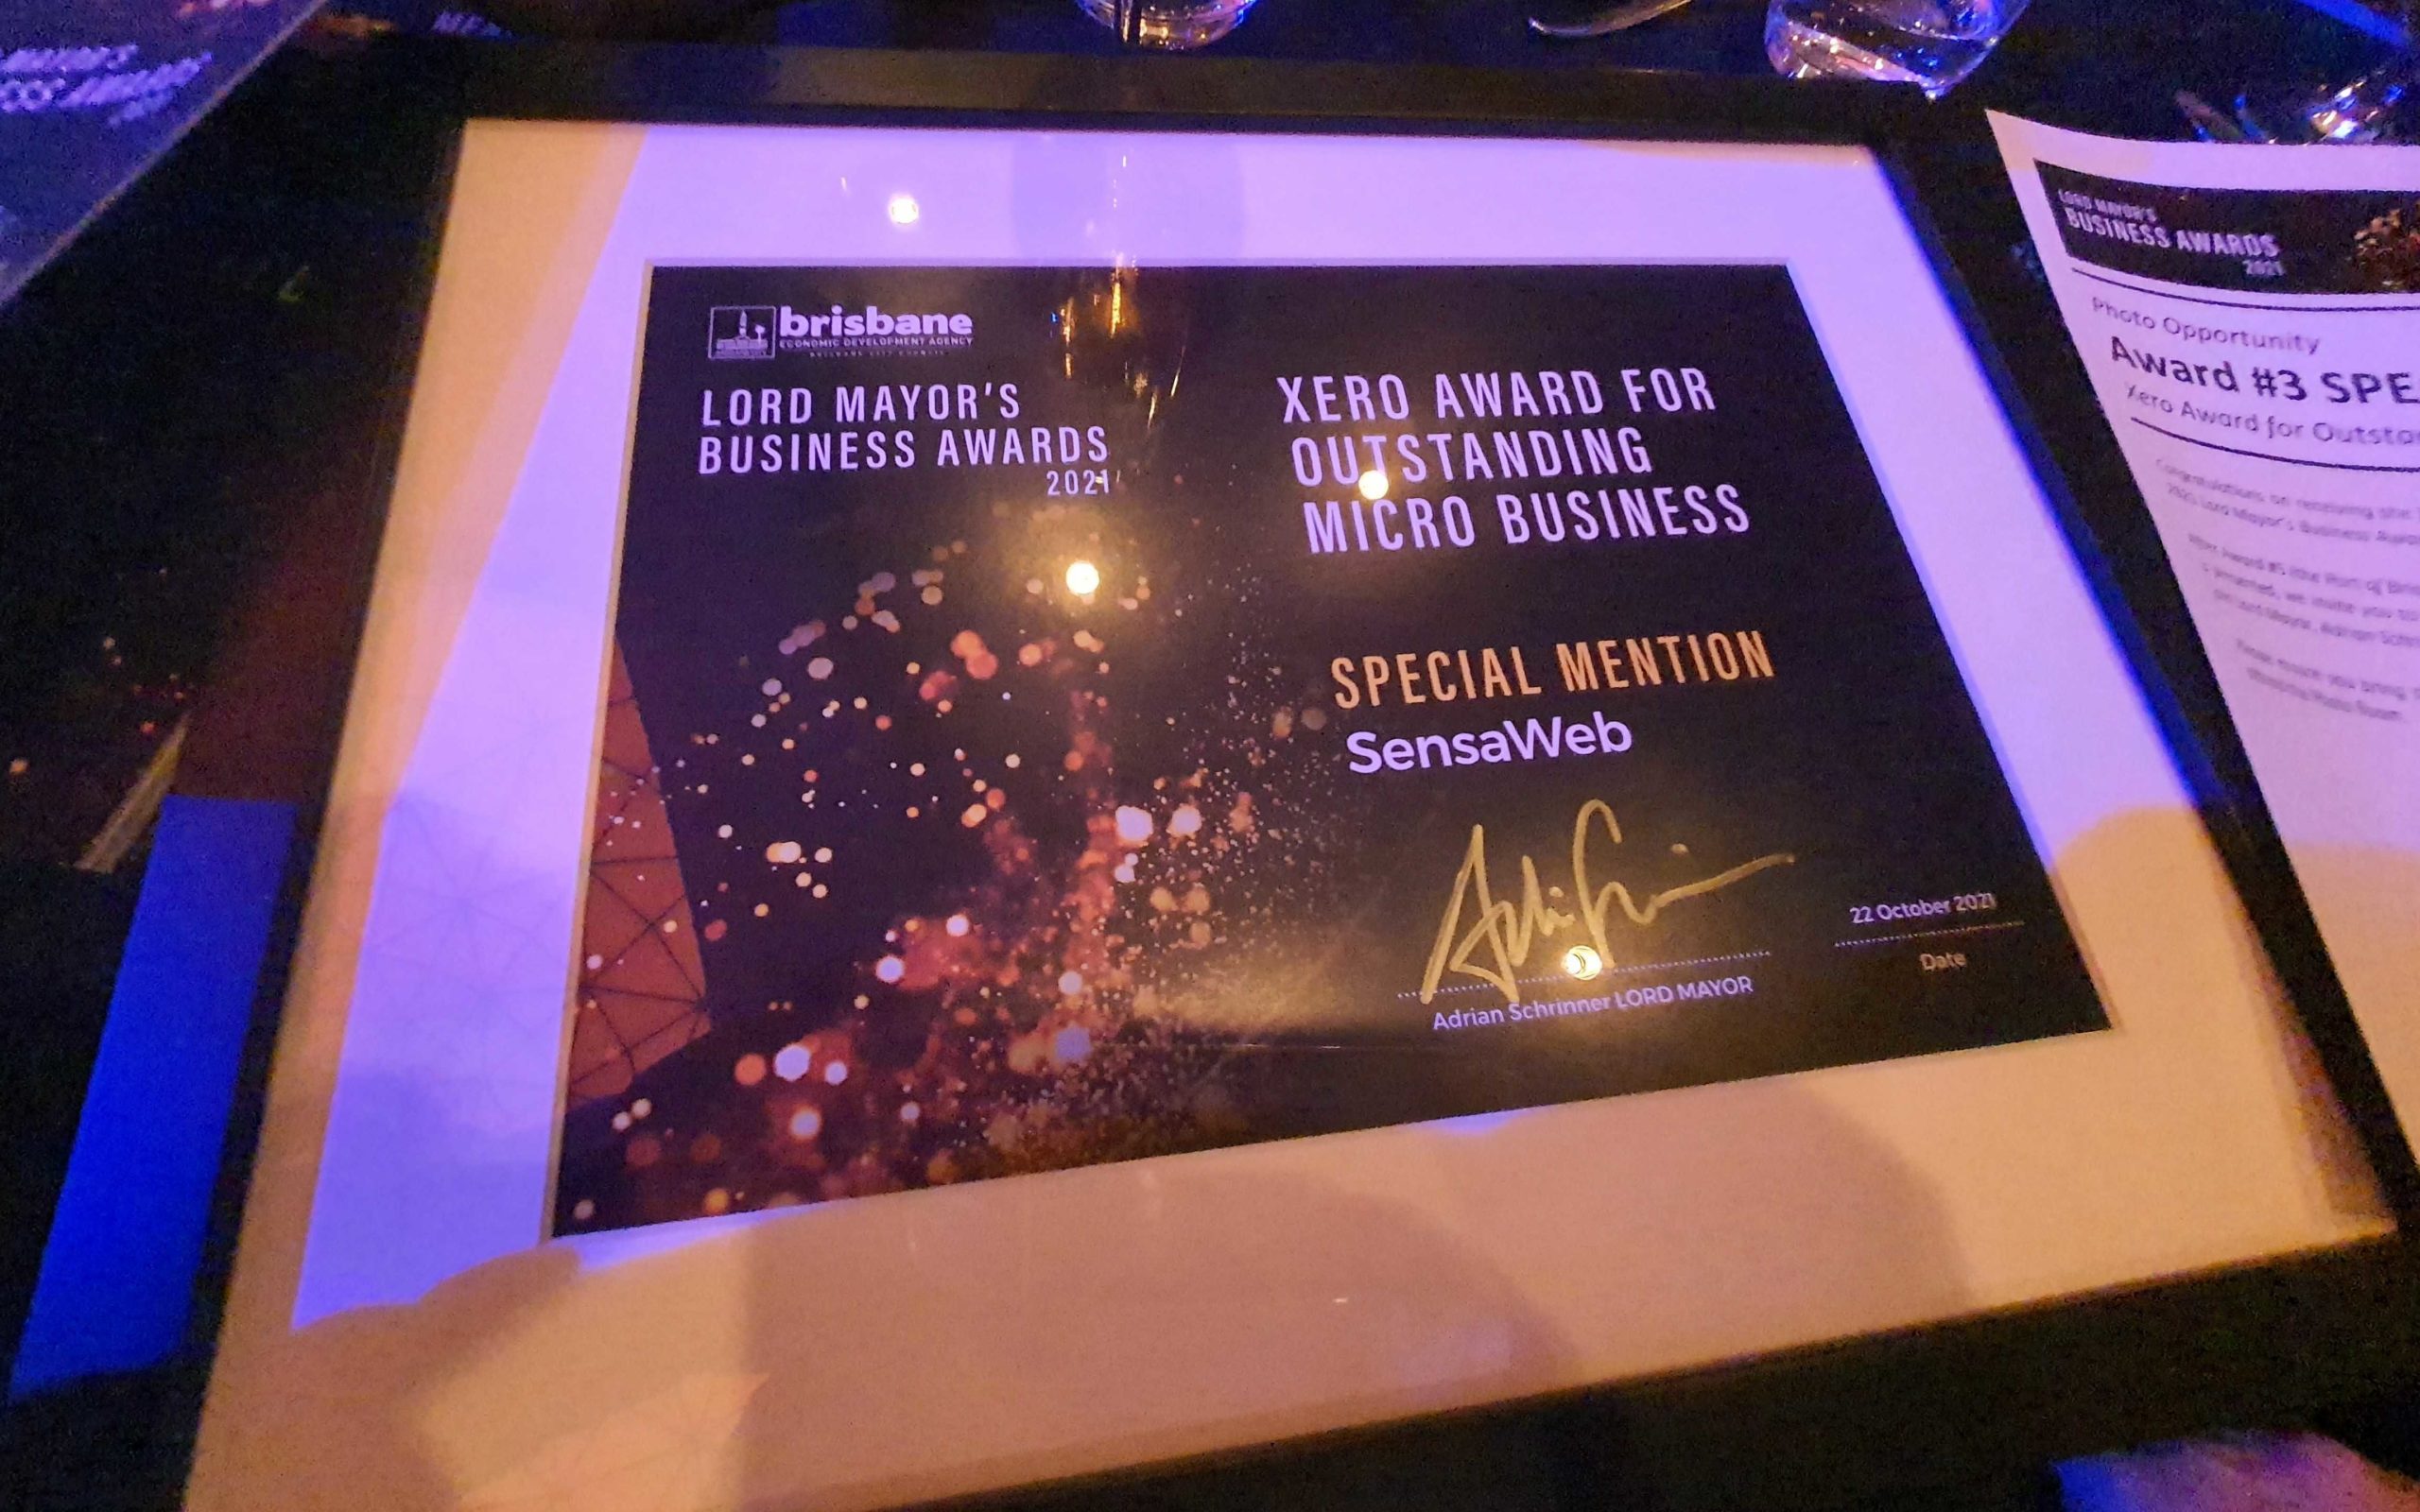 Outstanding Micro Business Award